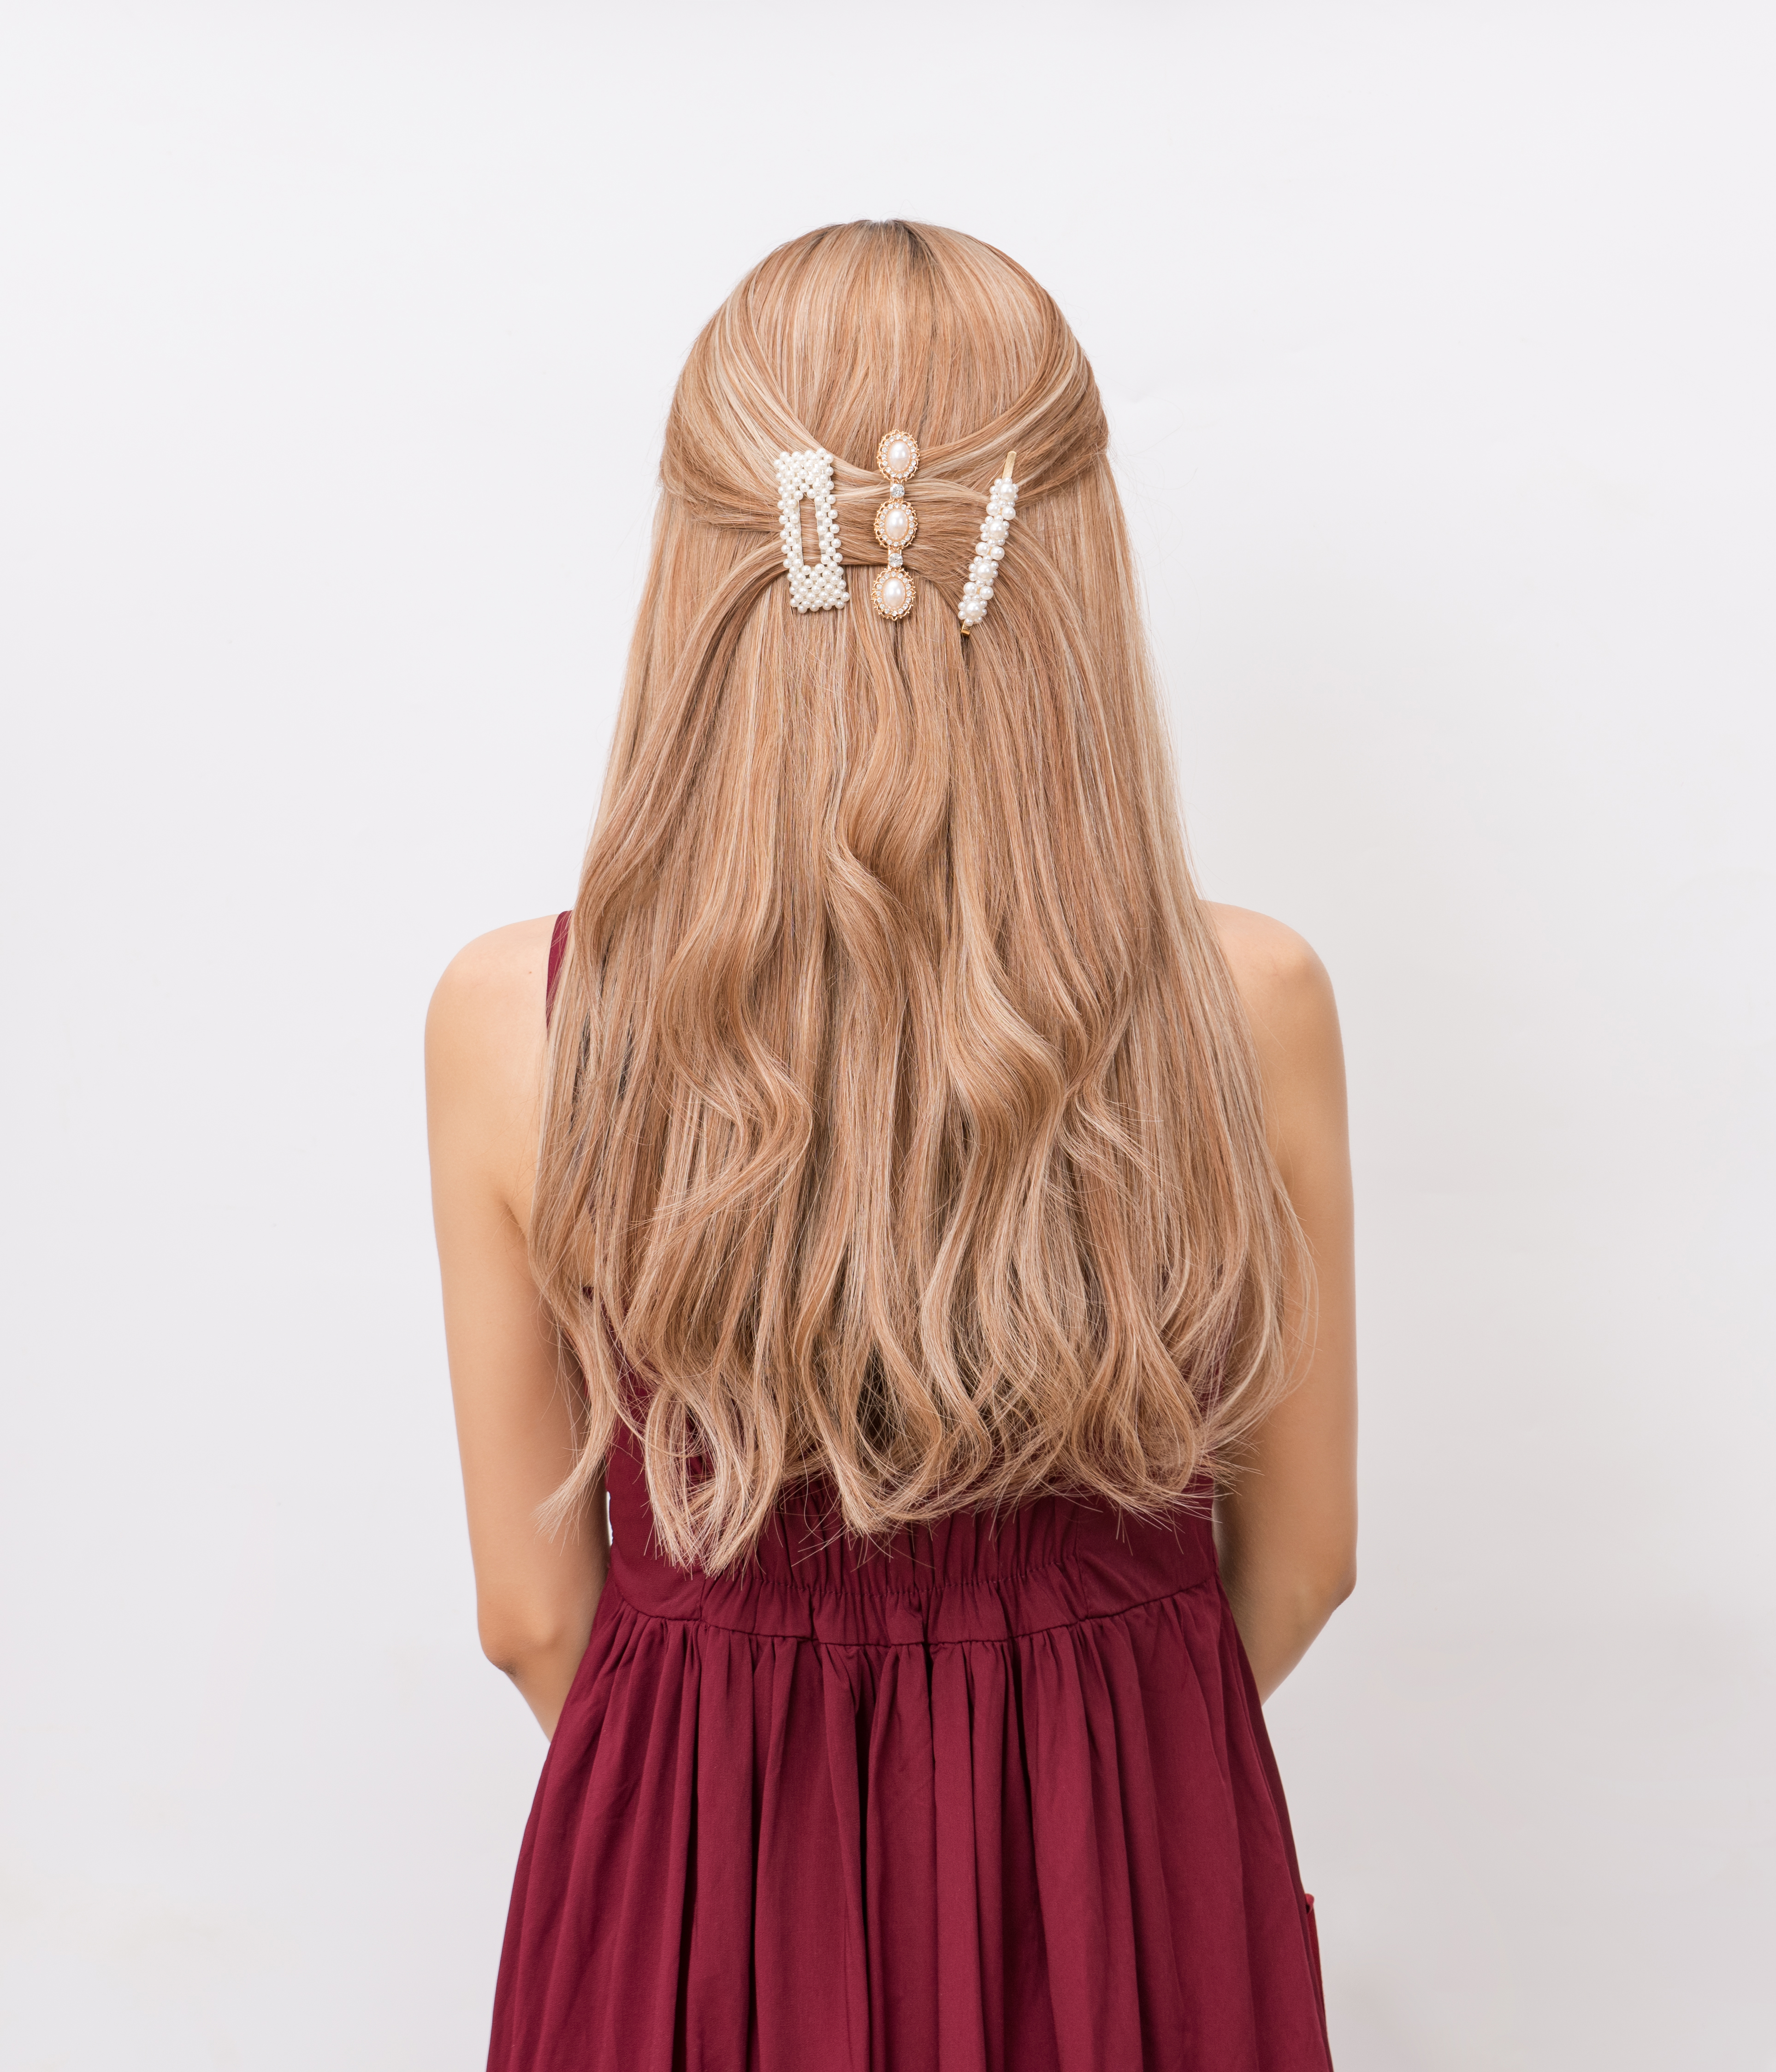 How to Keep your Hair Topper Looking Fabulous this Christmas